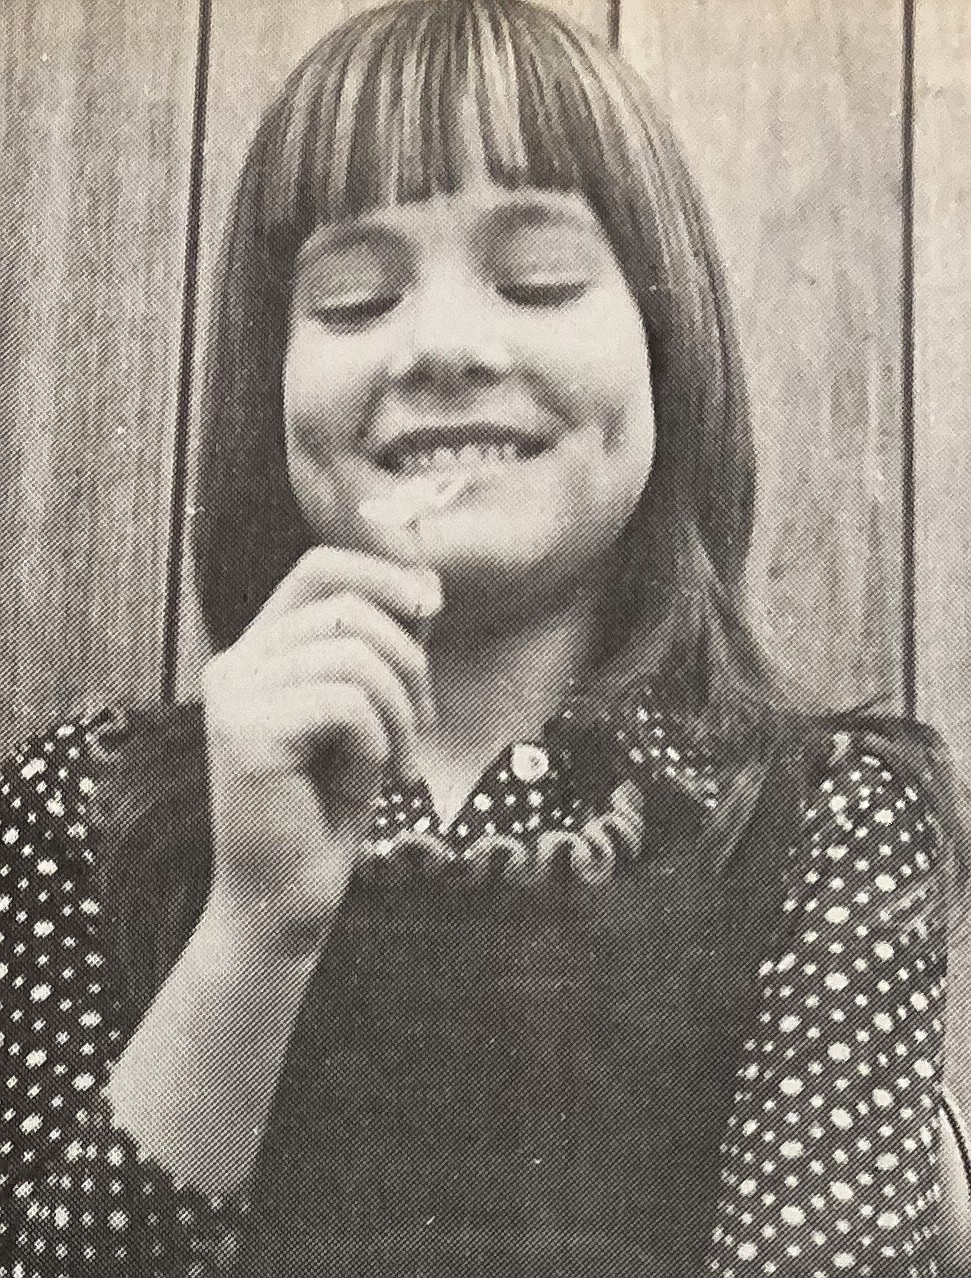 In January 1974, Lisa Dunton, 10, showed off the first buttercup.